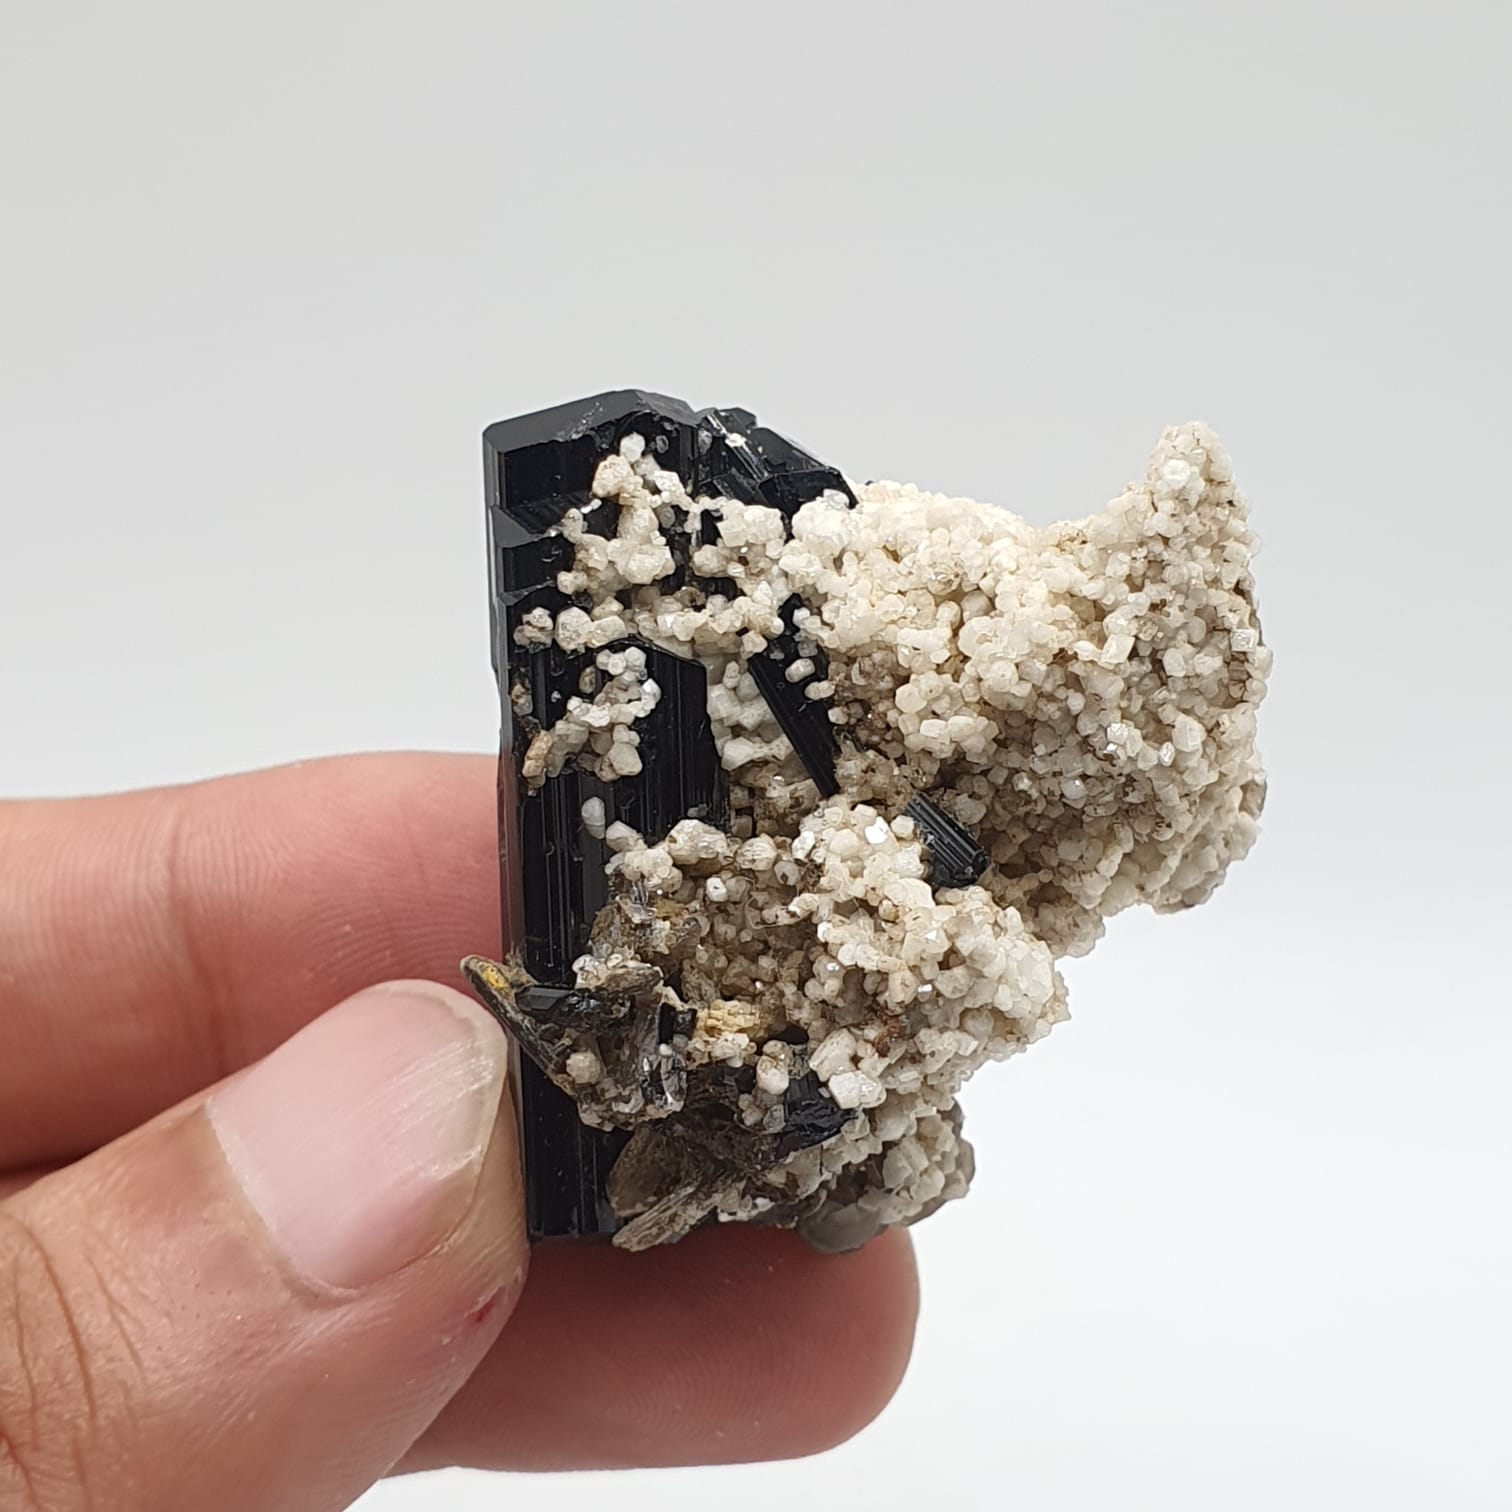 Lusterious And Glassy Faced Schorl Aka Black Tourmaline With White Albite